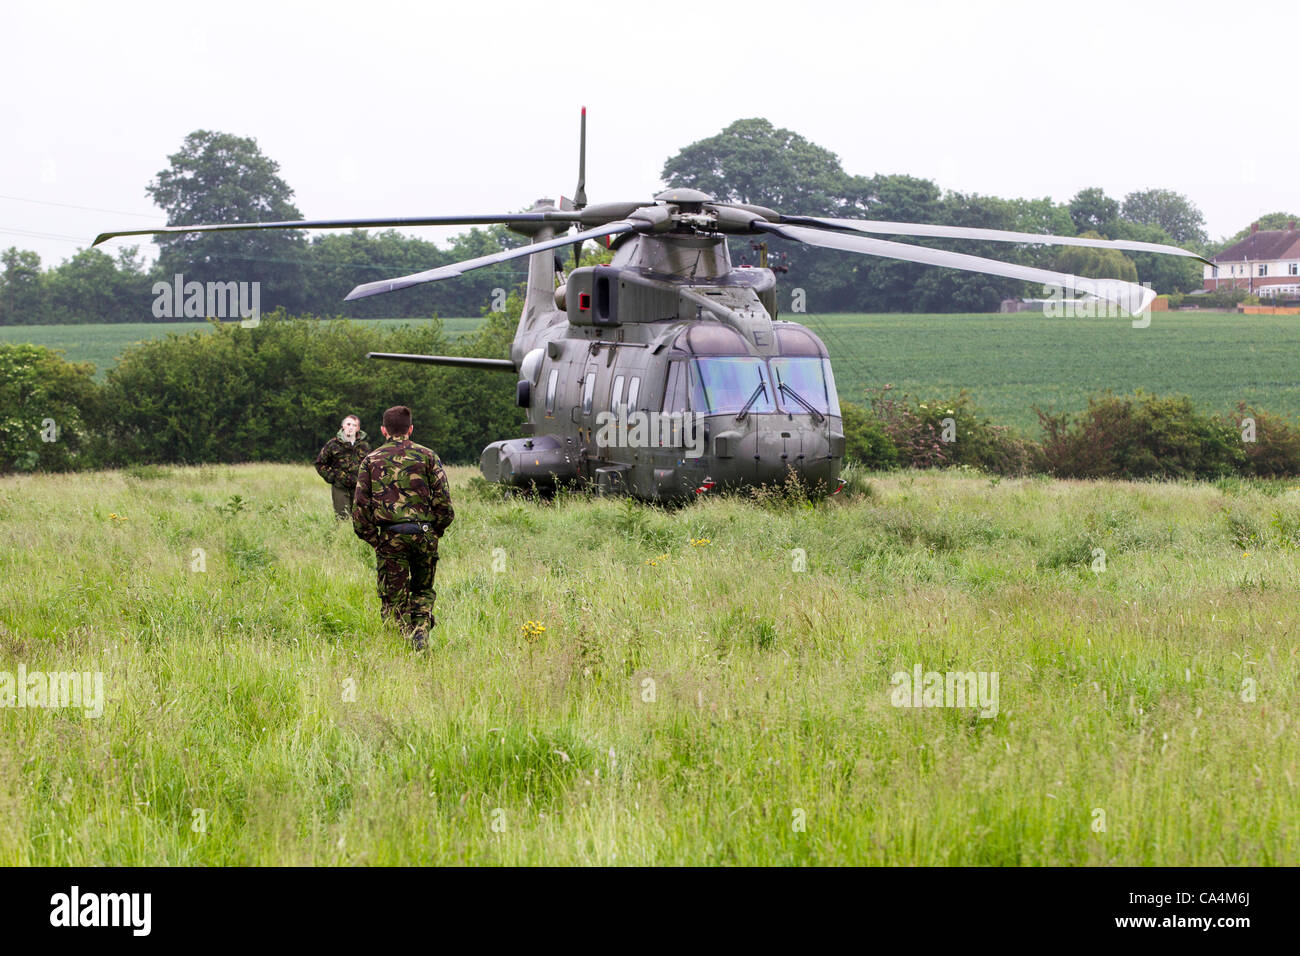 2012-06-07. Stanwick, Northamptonshire, UK. RAF Merlin mk3 helicopter grounded at a field in Stanwick on 06-06-2012 due to a loose panel near the rear rotor. After the repairs they hope to return to RAF Benson later this morning. Stock Photo